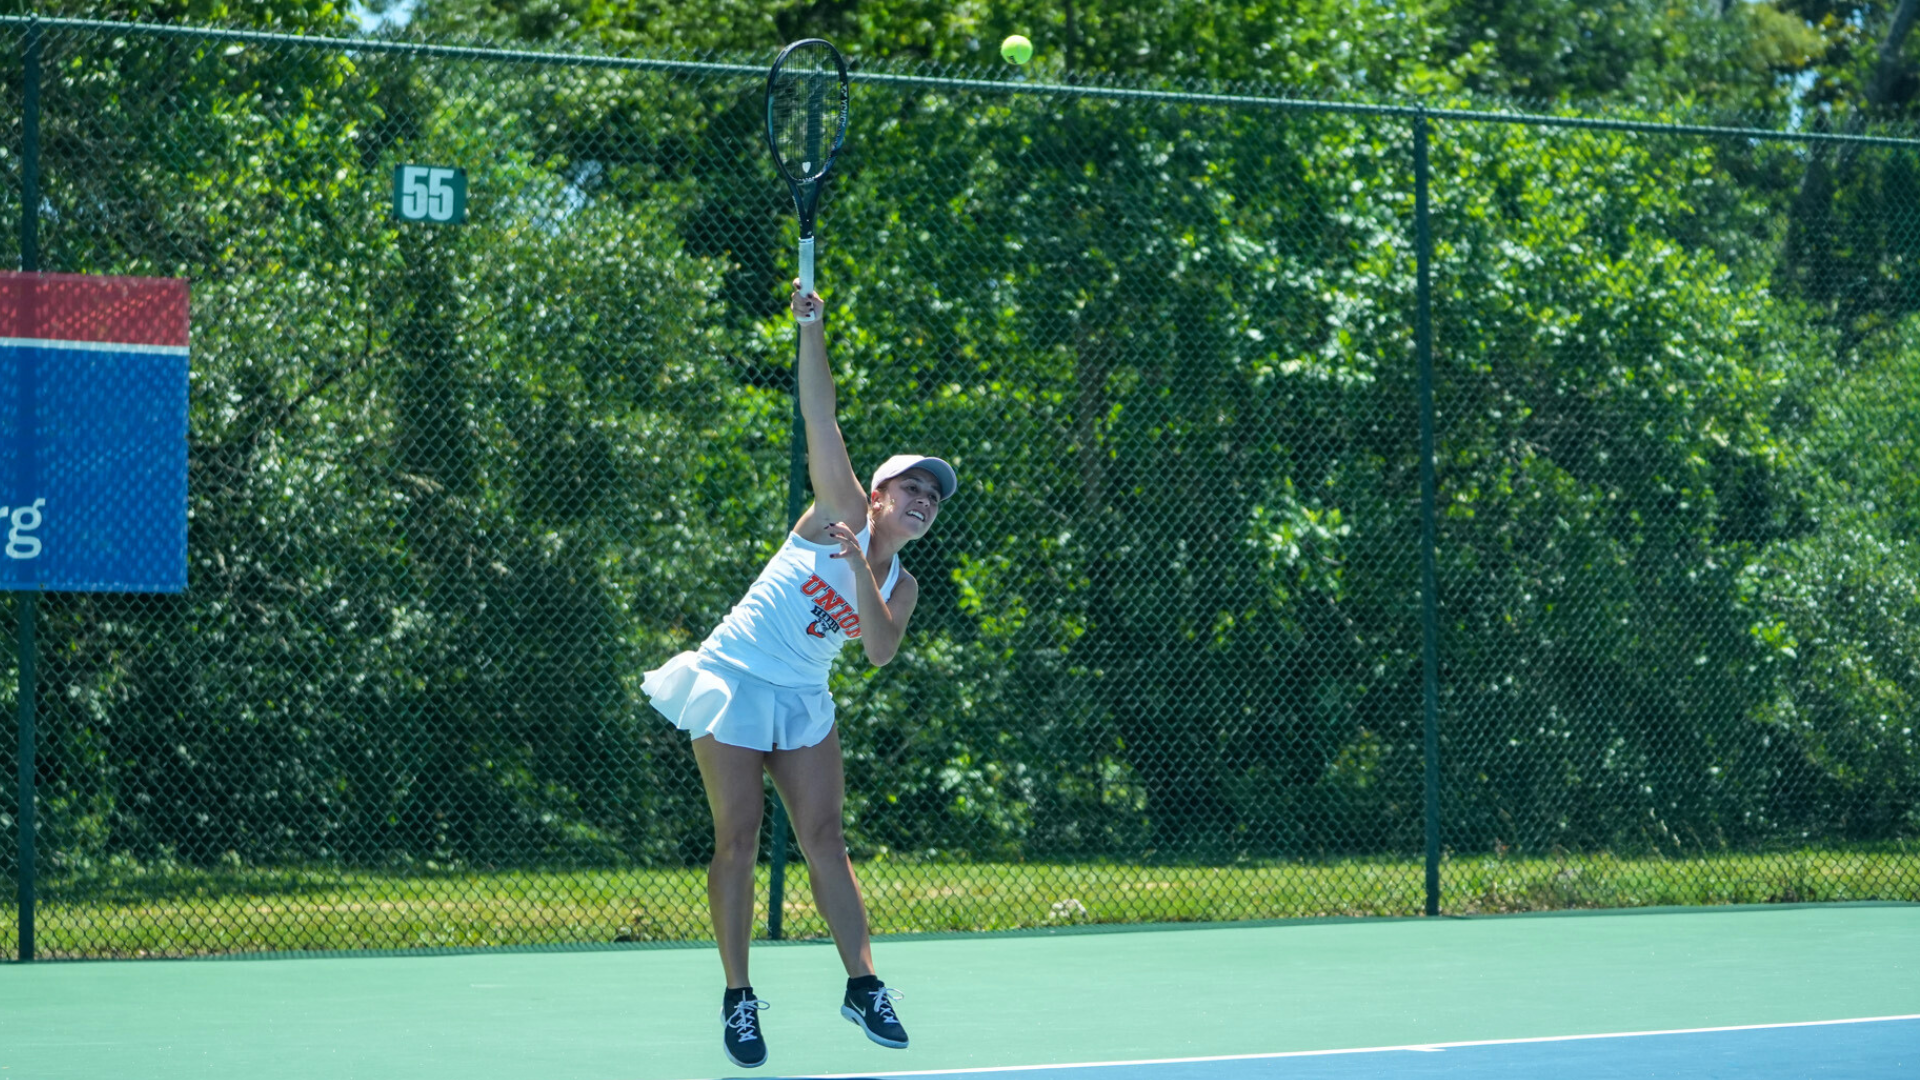 The Bulldogs fall in Second Round of NAIA Women&rsquo;s Tennis National Championship